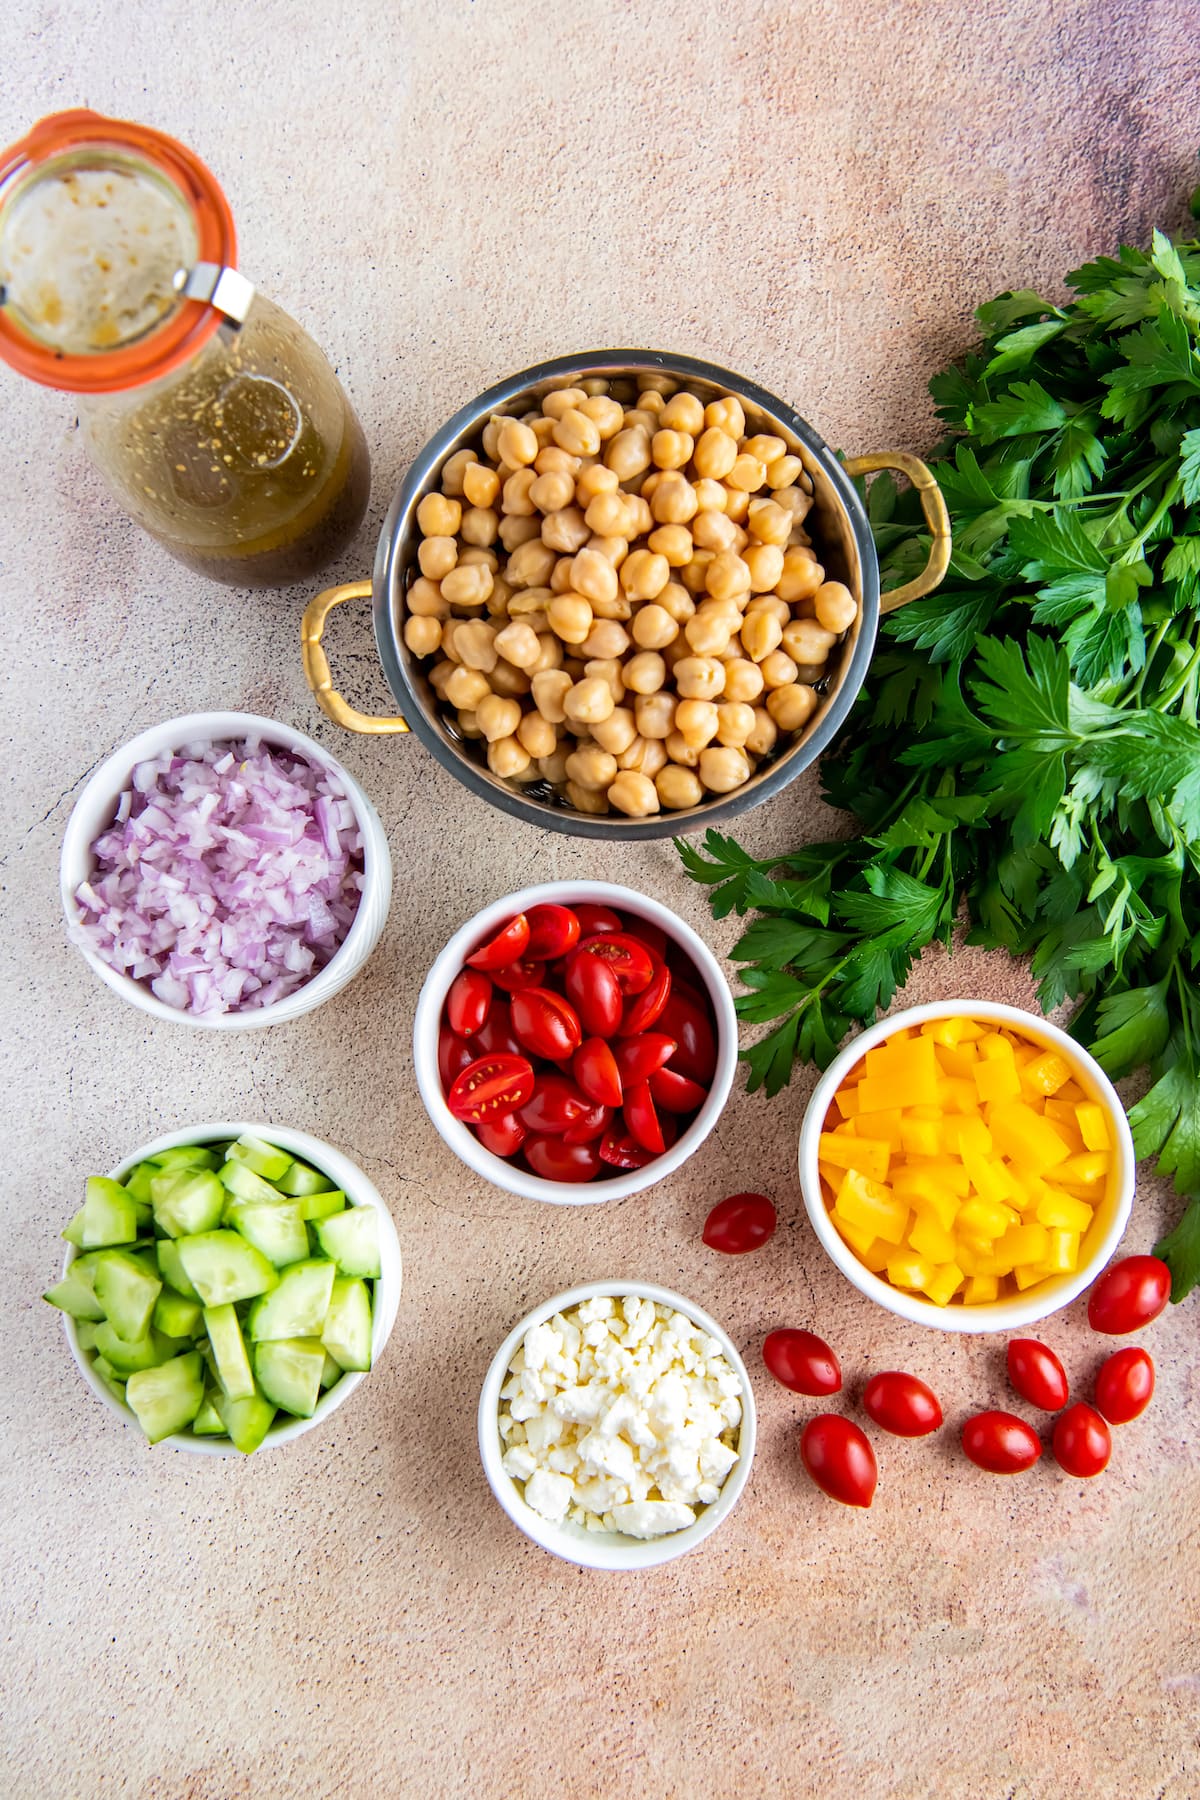 an assortment of ingredients in small bowls to make a chickpea salad like chickpeas, tomatoes, red onions, cucumbers, and fresh herbs